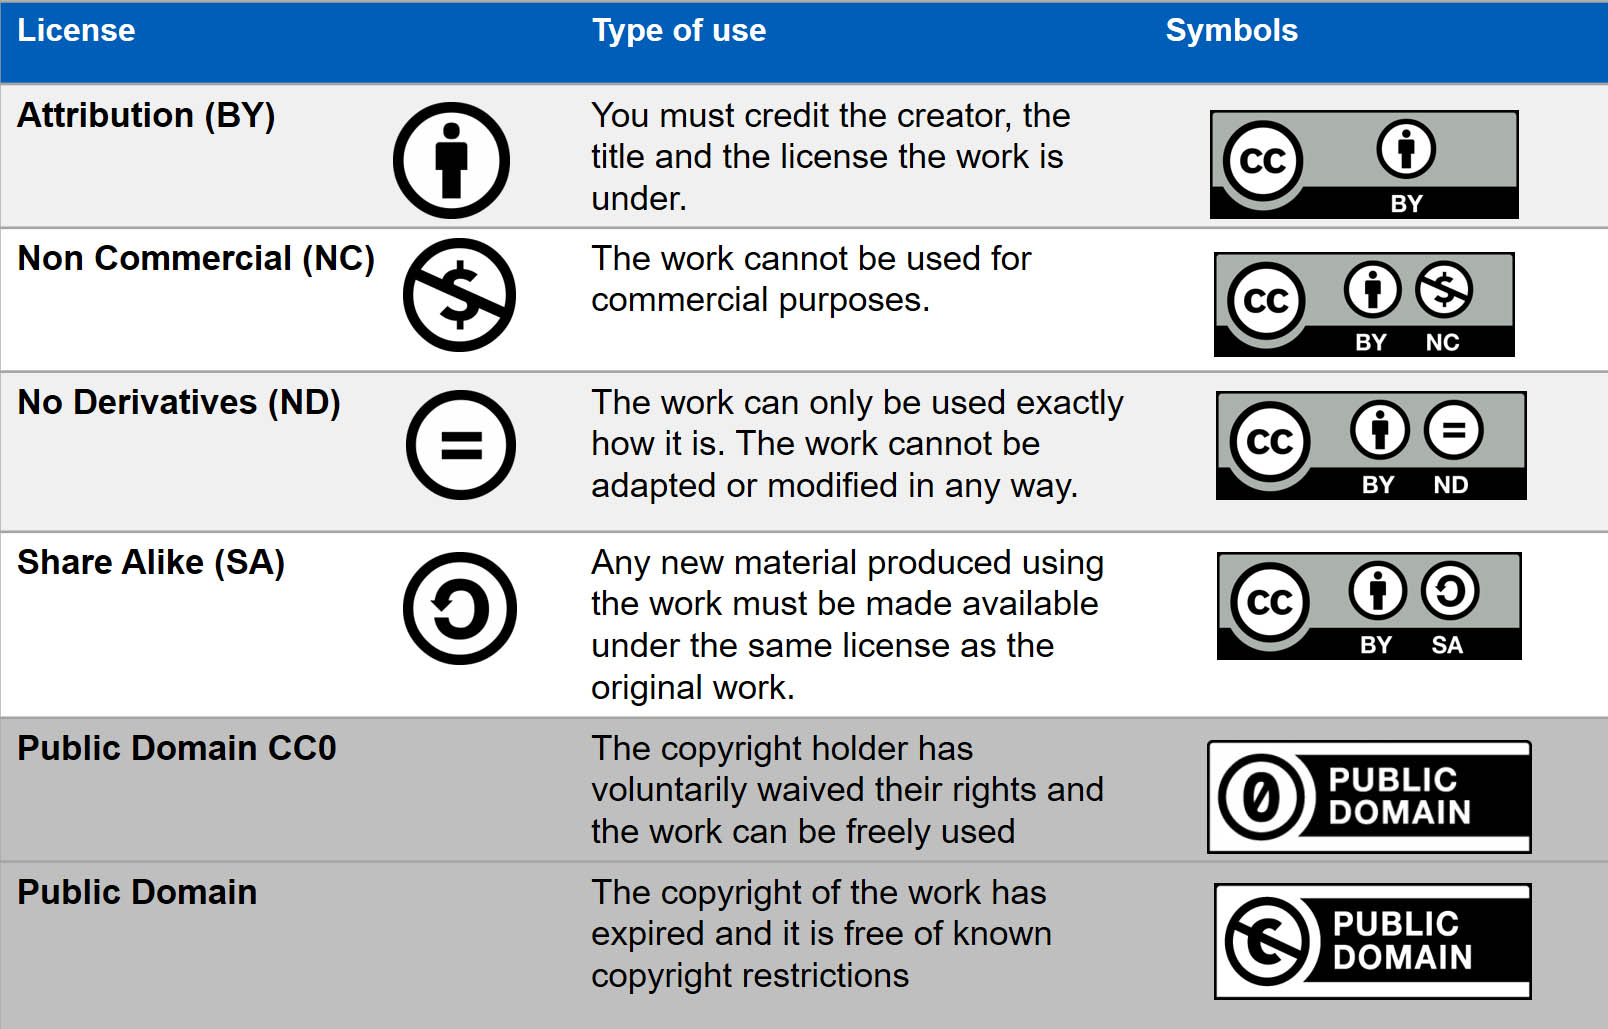 Table of Creative Commons licences. Lists the six types of licenses. First is Attribution which means you must credit the creator. Second, non-commercial which means work cannot be used for commercial purposes. Third is no derivatives which means work cannot be modified. Fourthly, ShareAlike which means any new material produced using the work must be available under the same licence. Fifth is the public domain, where the copyright owner waives their rights or and finally, the sixth type is public domain, where the copyright has expired